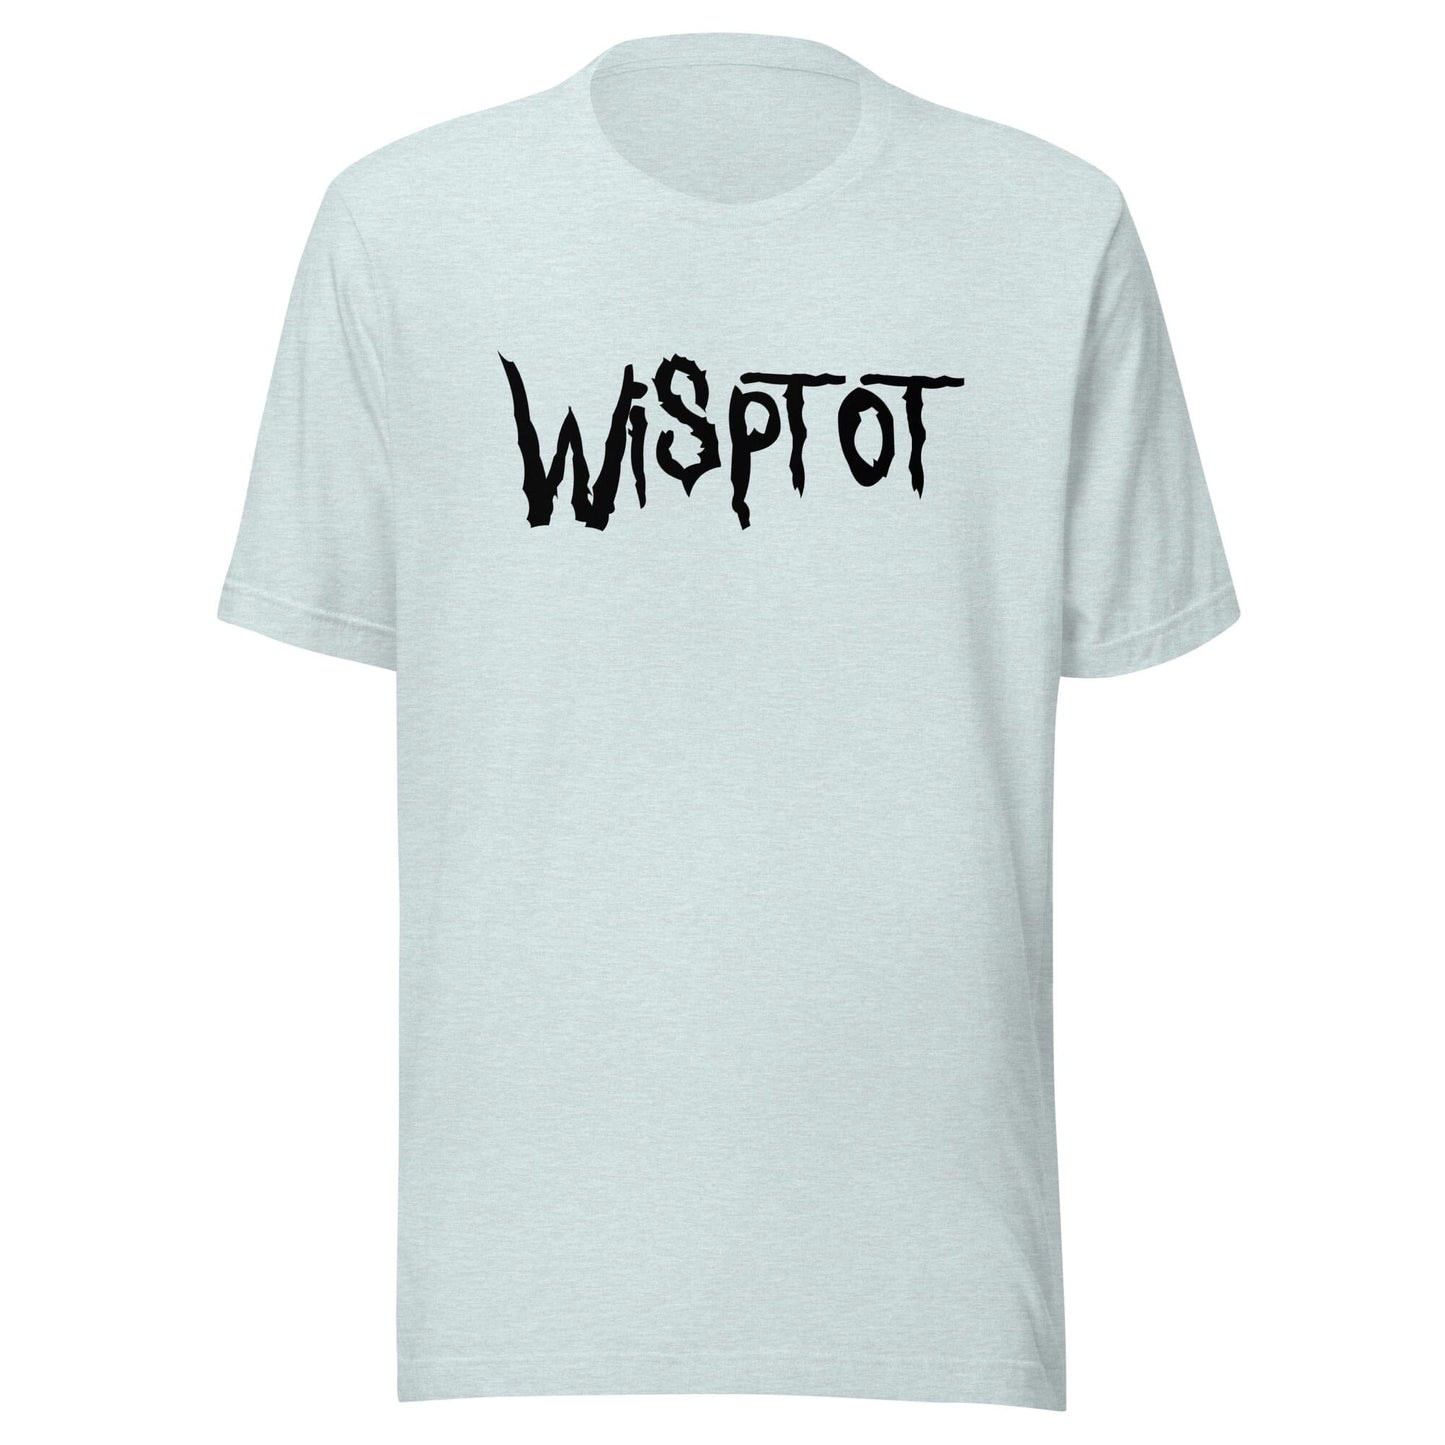 WispTot T-Shirt (Extended Sizing) [Unfoiled] (All net proceeds go to equally to Kitty CrusAIDe and Rags to Riches Animal Rescue) JoyousJoyfulJoyness Heather Prism Ice Blue 3XL 